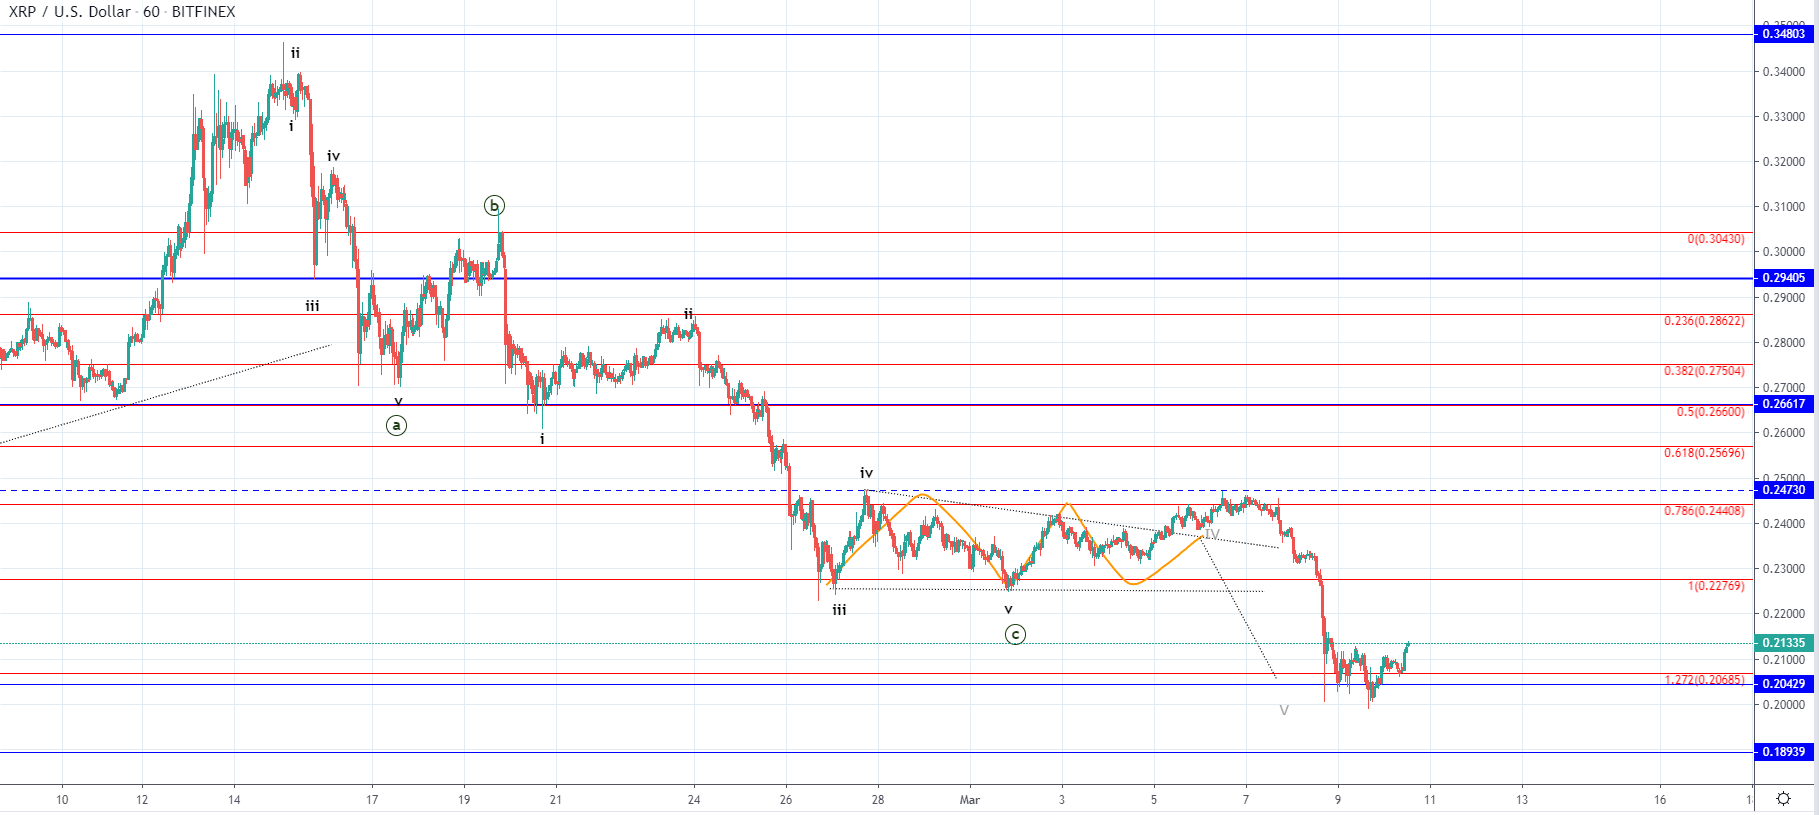 BTC and XRP - Correction likely ended